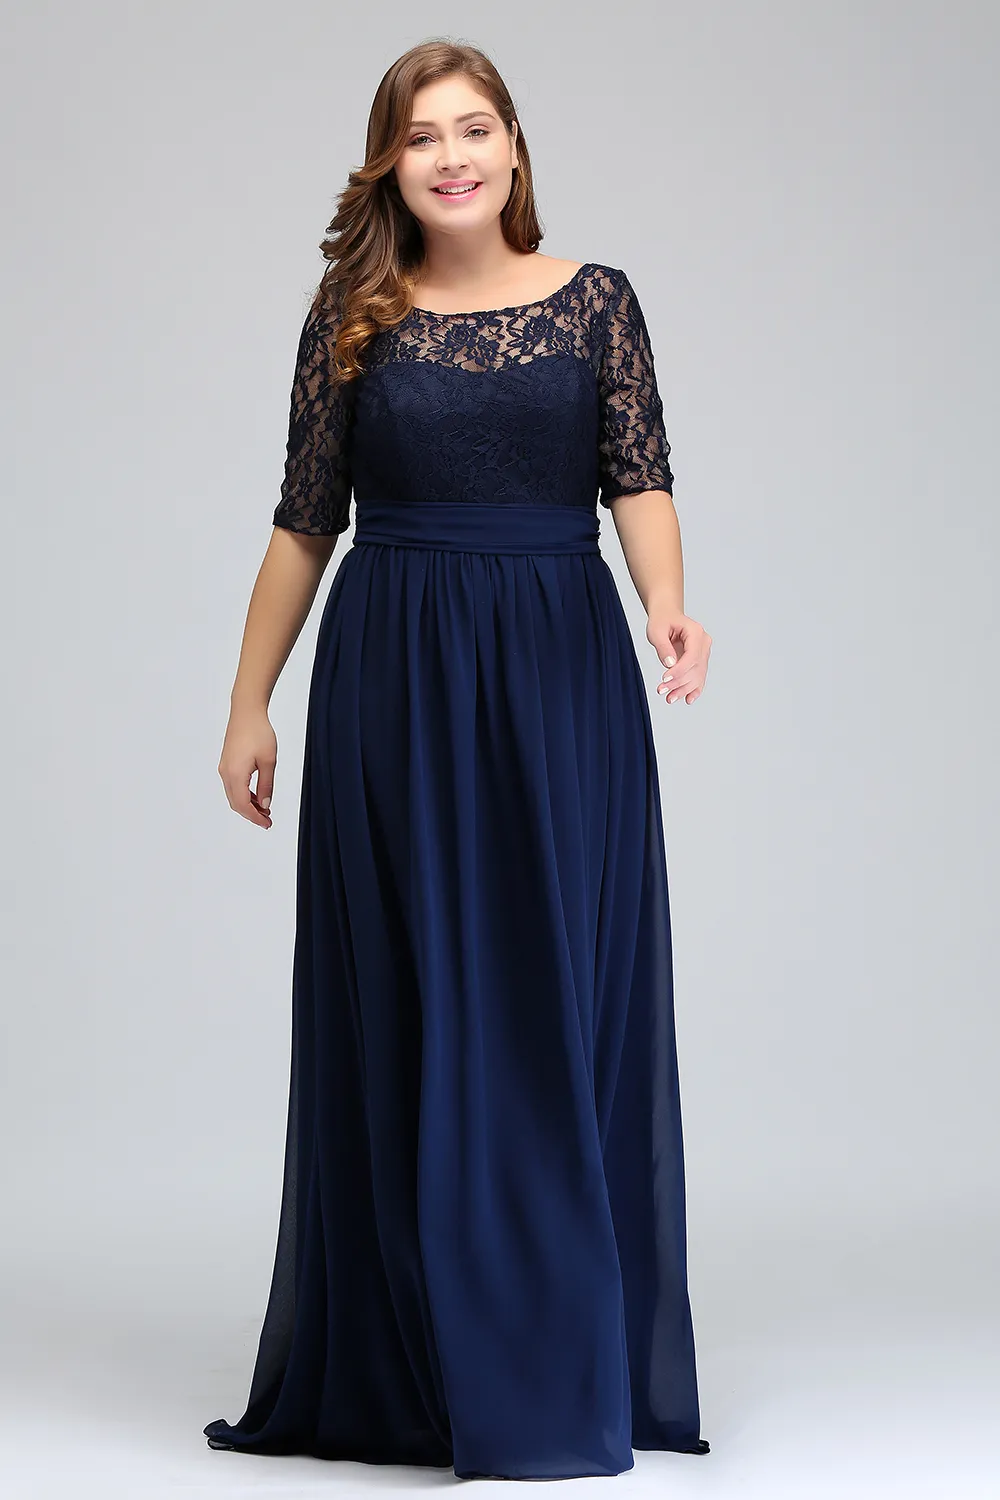 Dark Navy Black Burgundy Half Long Sleeves Plus Size Prom Dresses Lace Top A Line Chiffon V Back Mother of Bride Dresses Cheap Gowns CP 304E